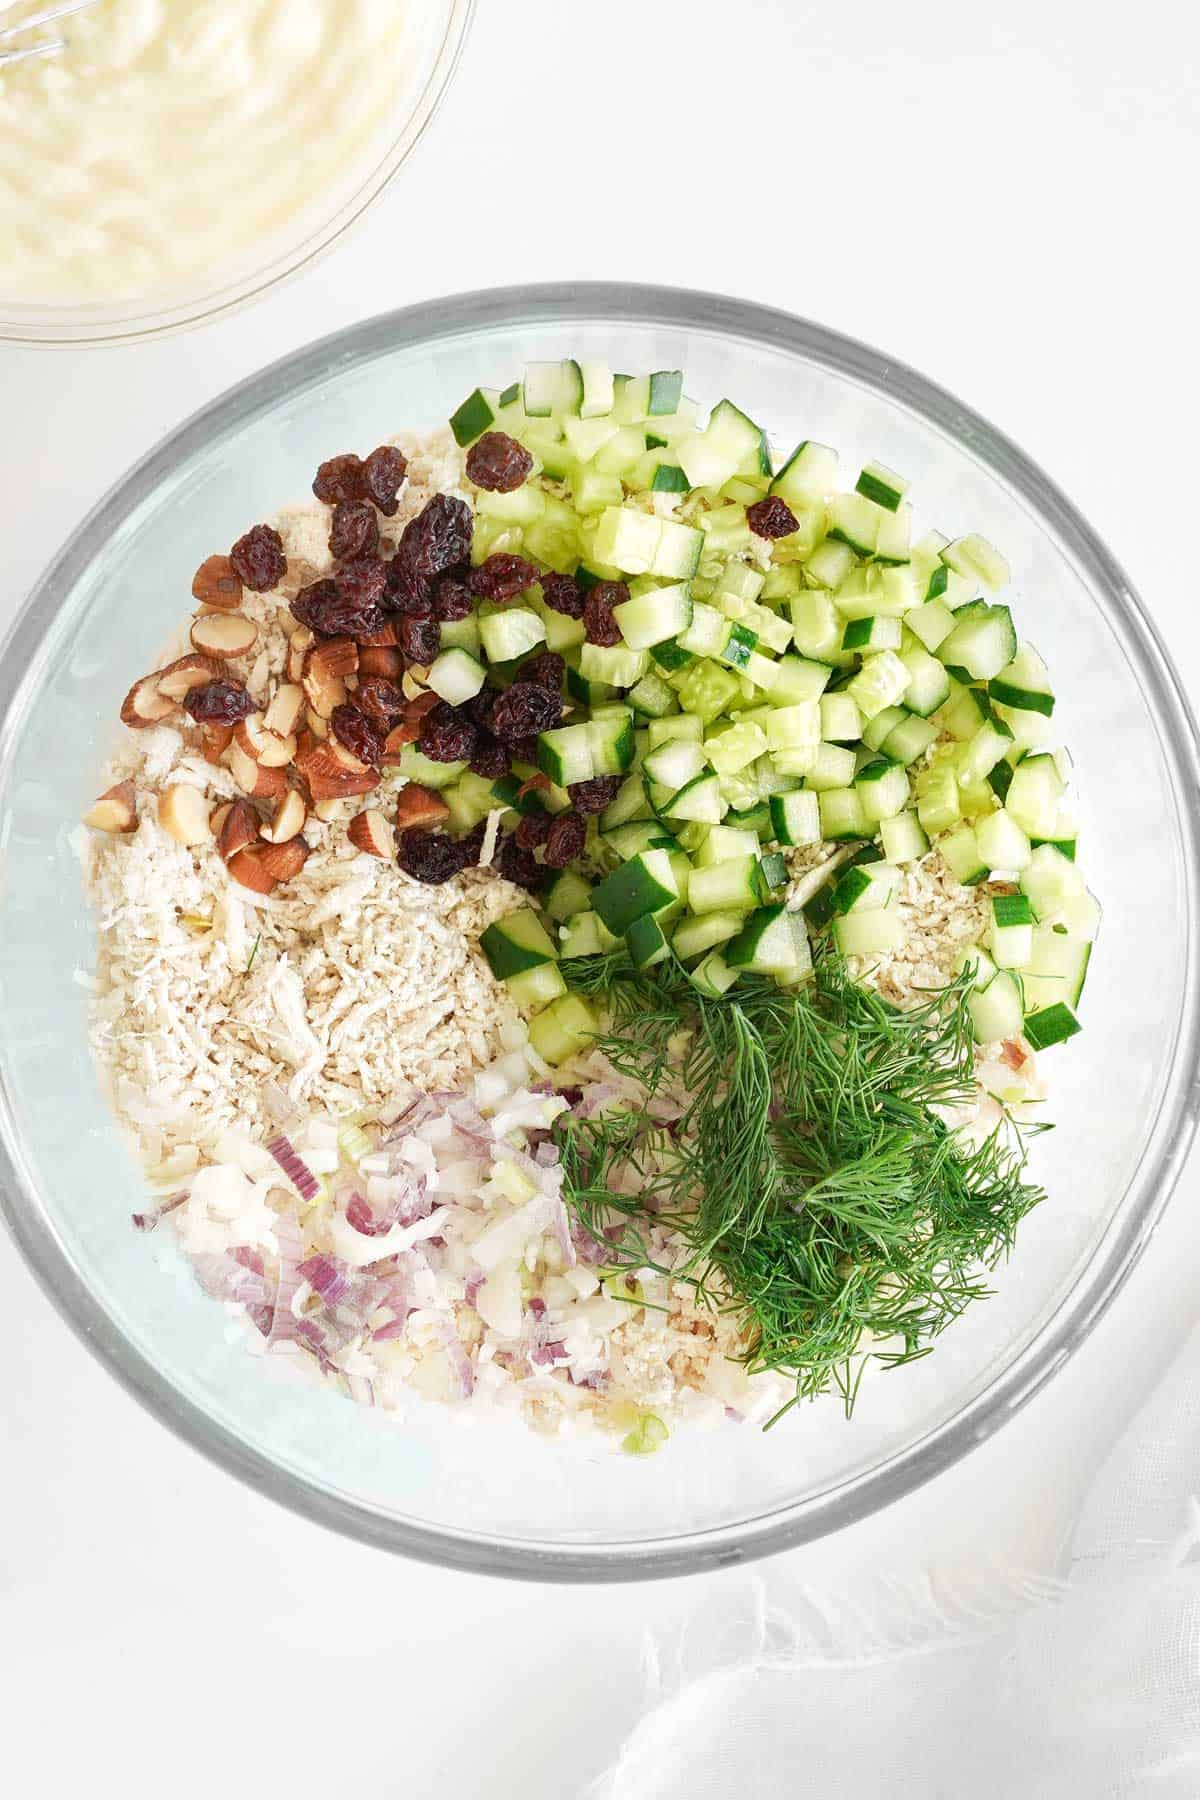 A glass bowl containing a mixture of chopped cucumber, shredded chicken, raisins, sliced almonds, chopped red onion, and fresh dill.